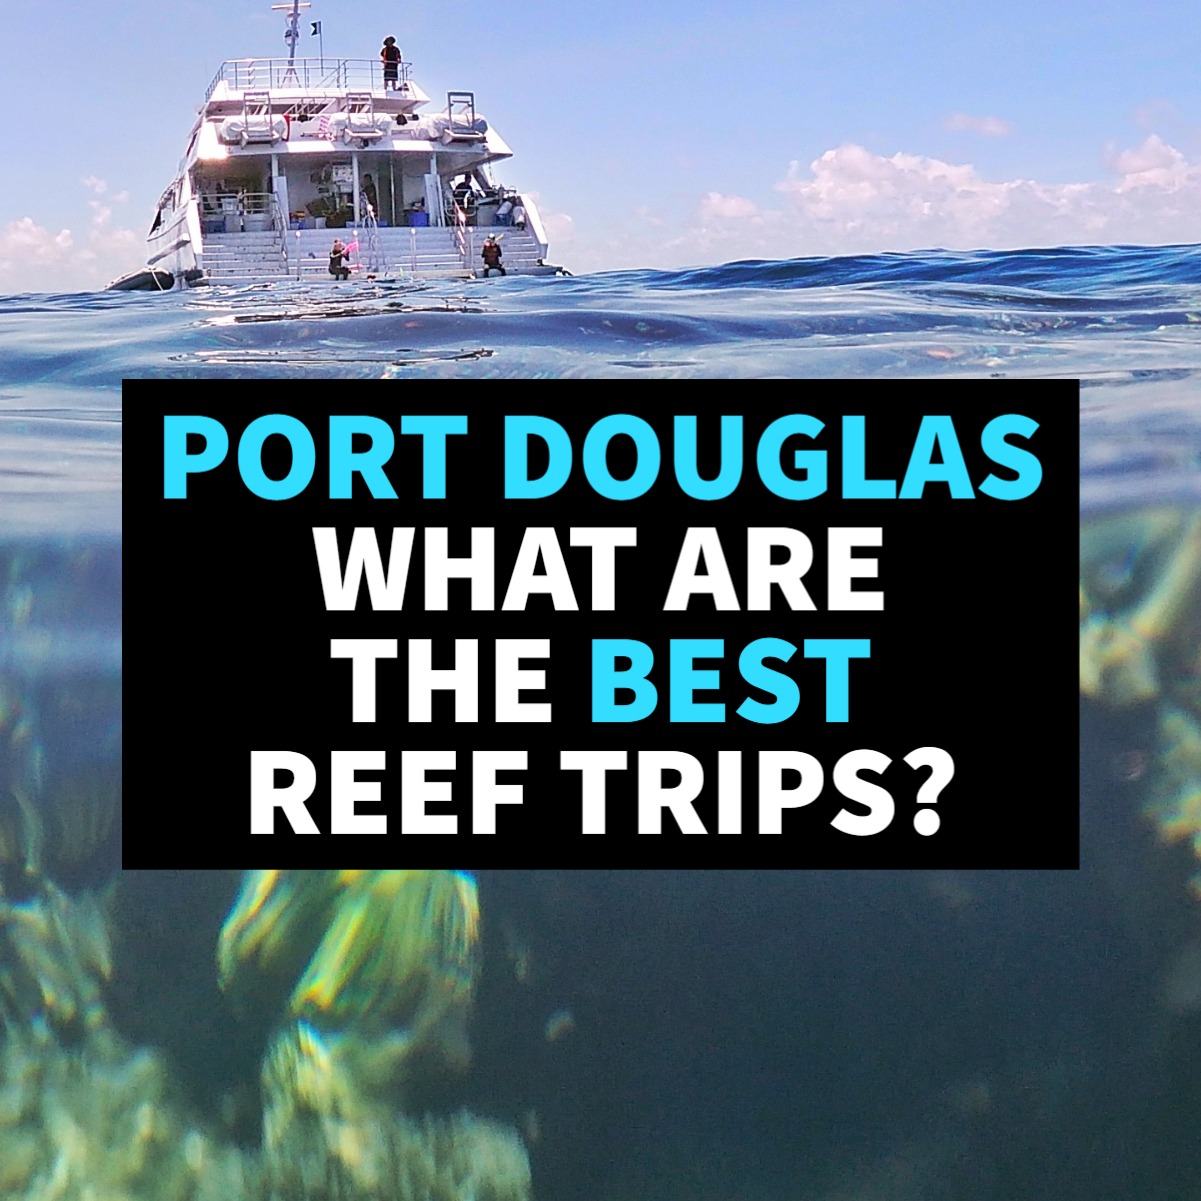 What are the best reef trips from Port Douglas